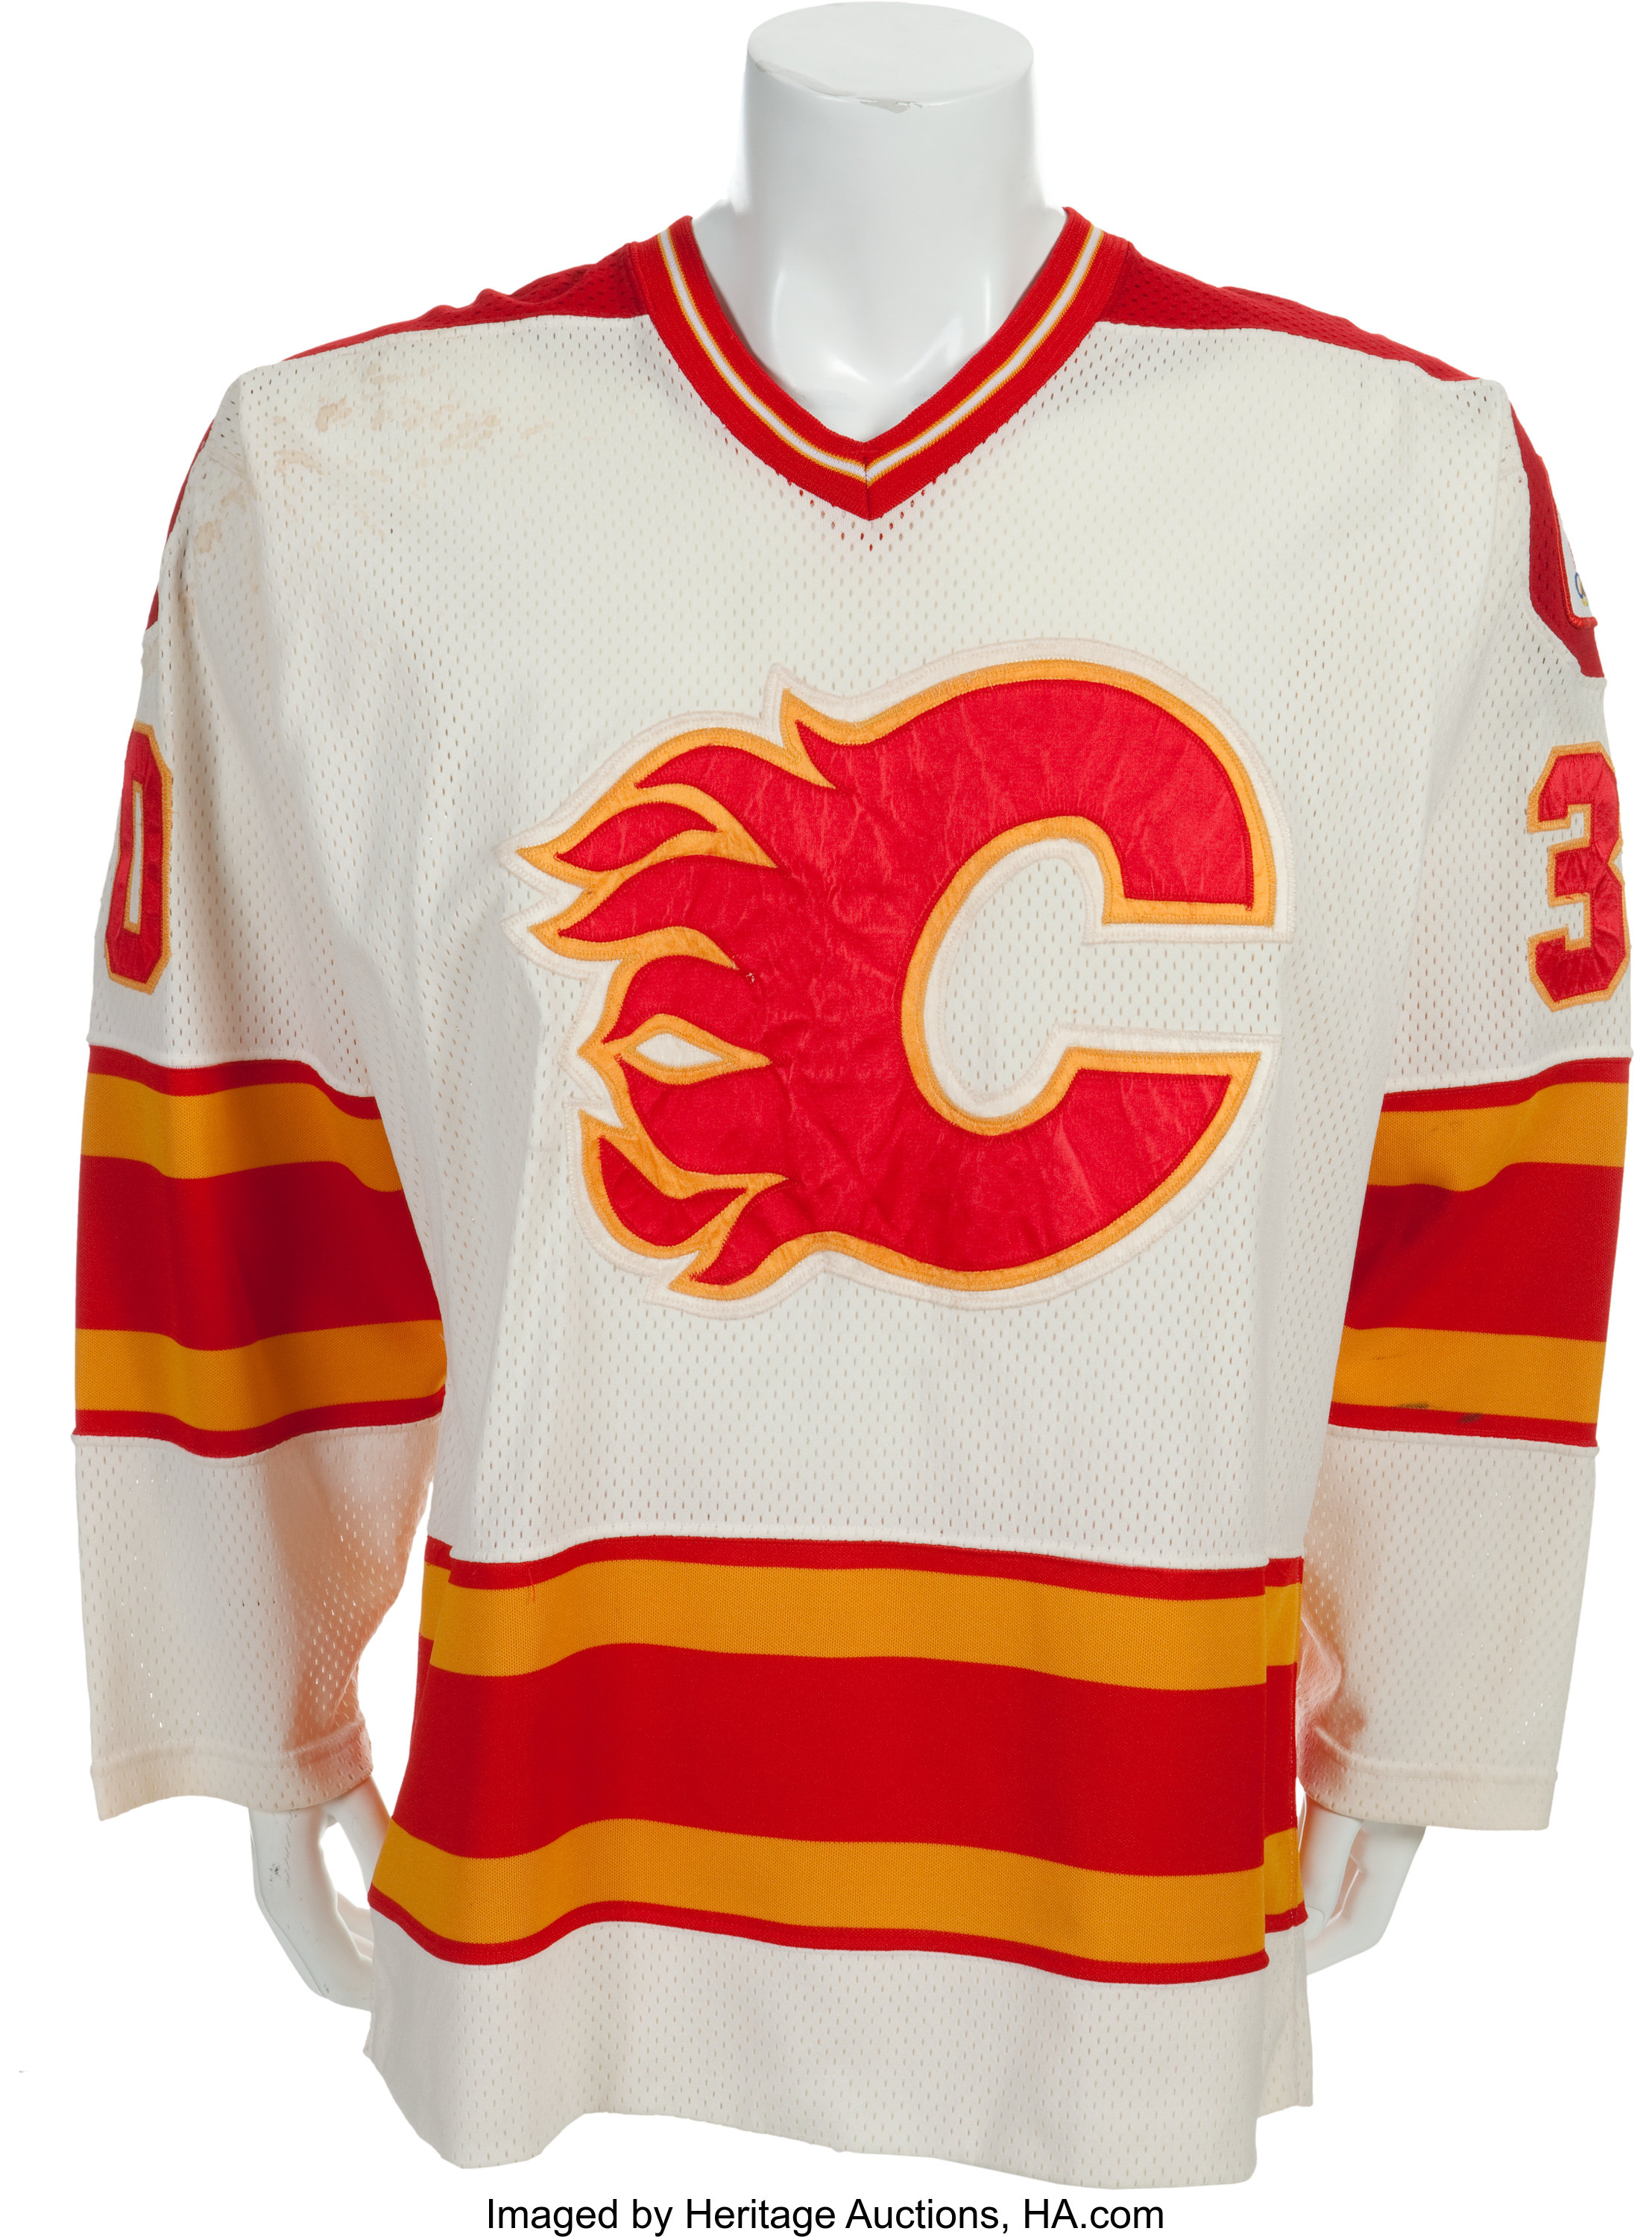 Online sale of game-worn Flames jerseys starts Tuesday